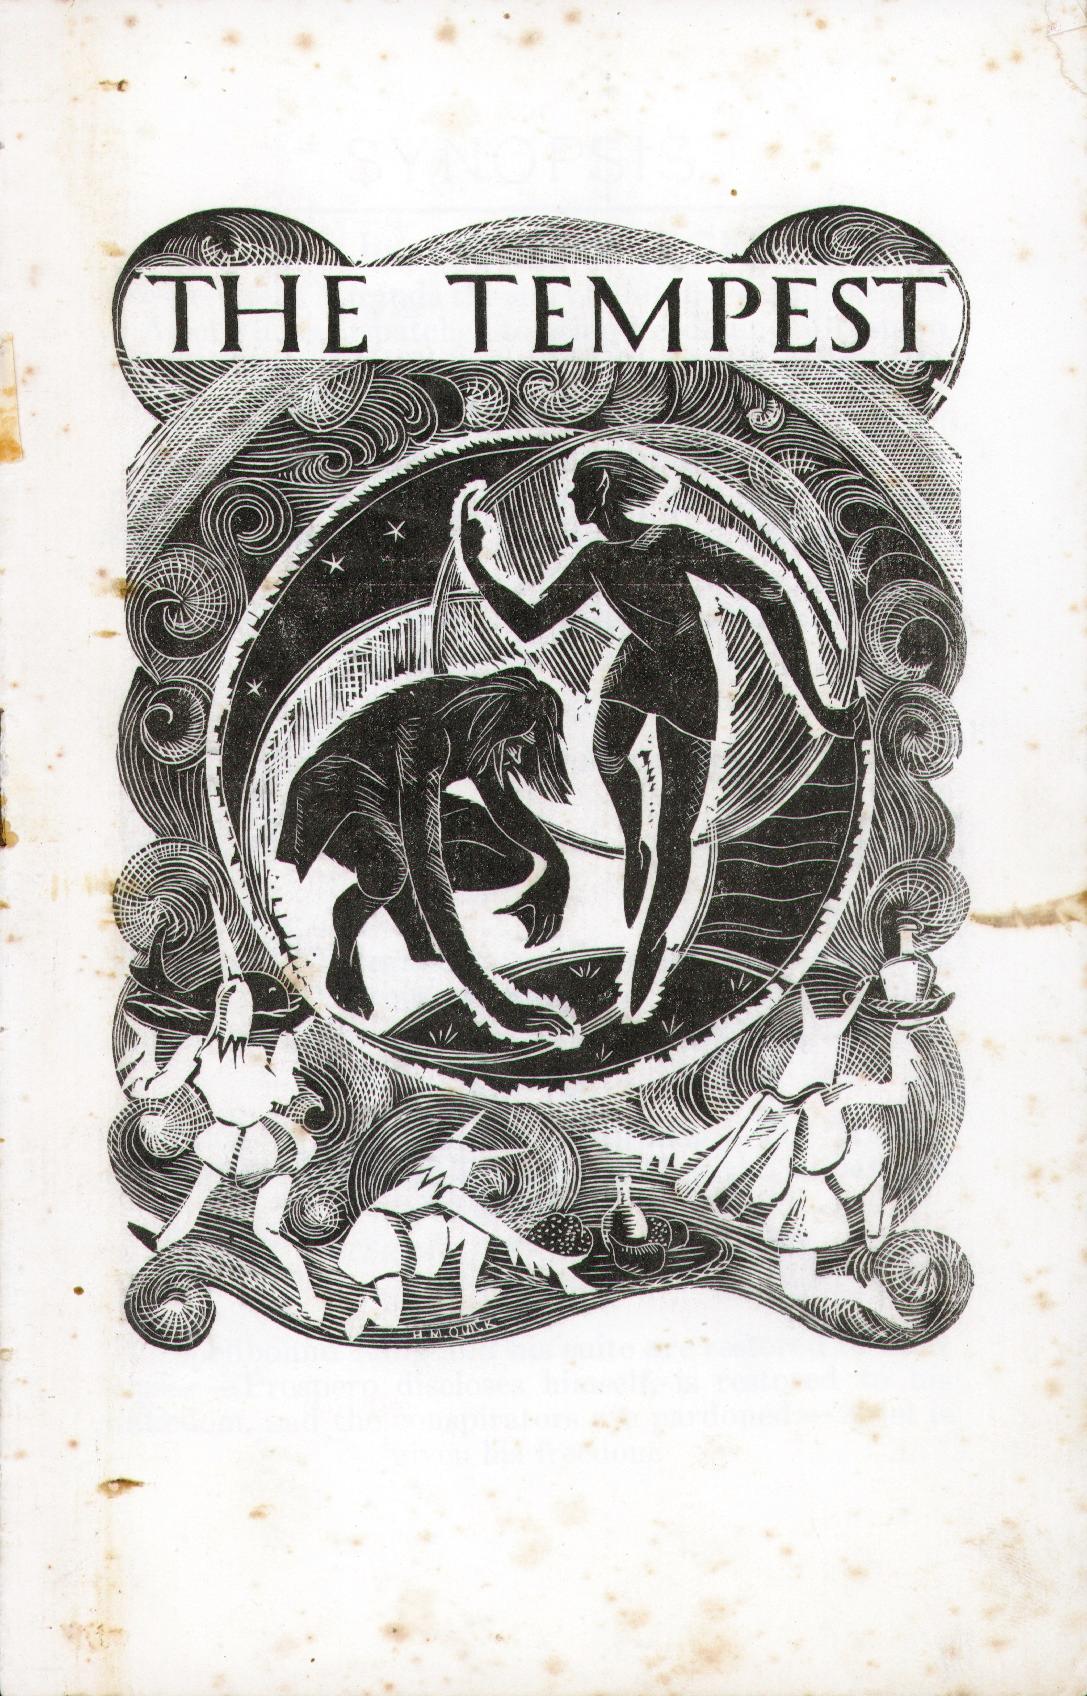 The Times newspaper review of The Minack Theatre's debut production, "The Tempest," in 1932. (The Minack Theatre)